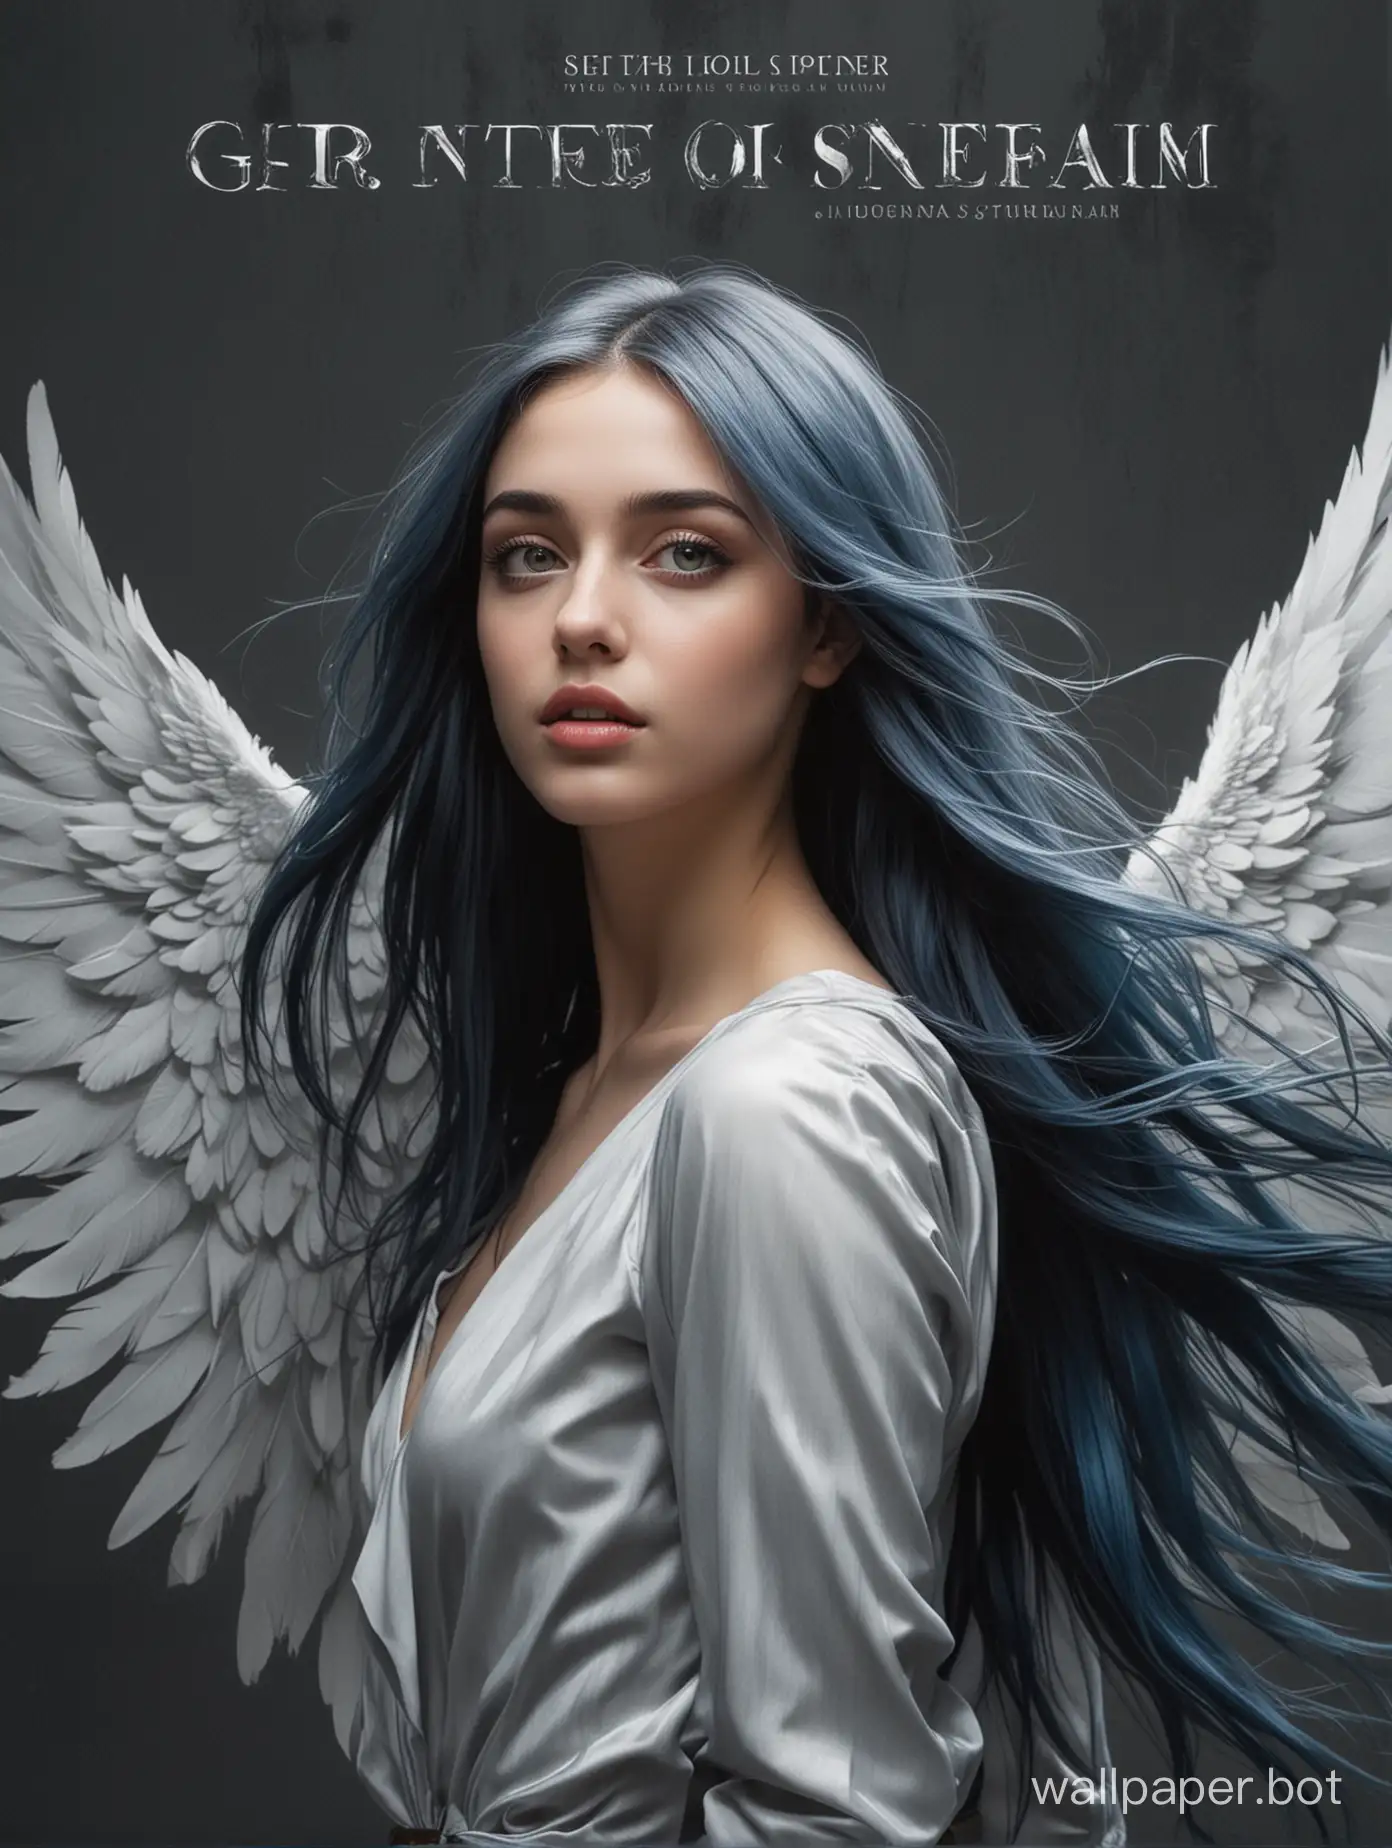 Mystical-Girl-with-BlackishBlue-Hair-and-Wings-in-a-Melancholic-Setting